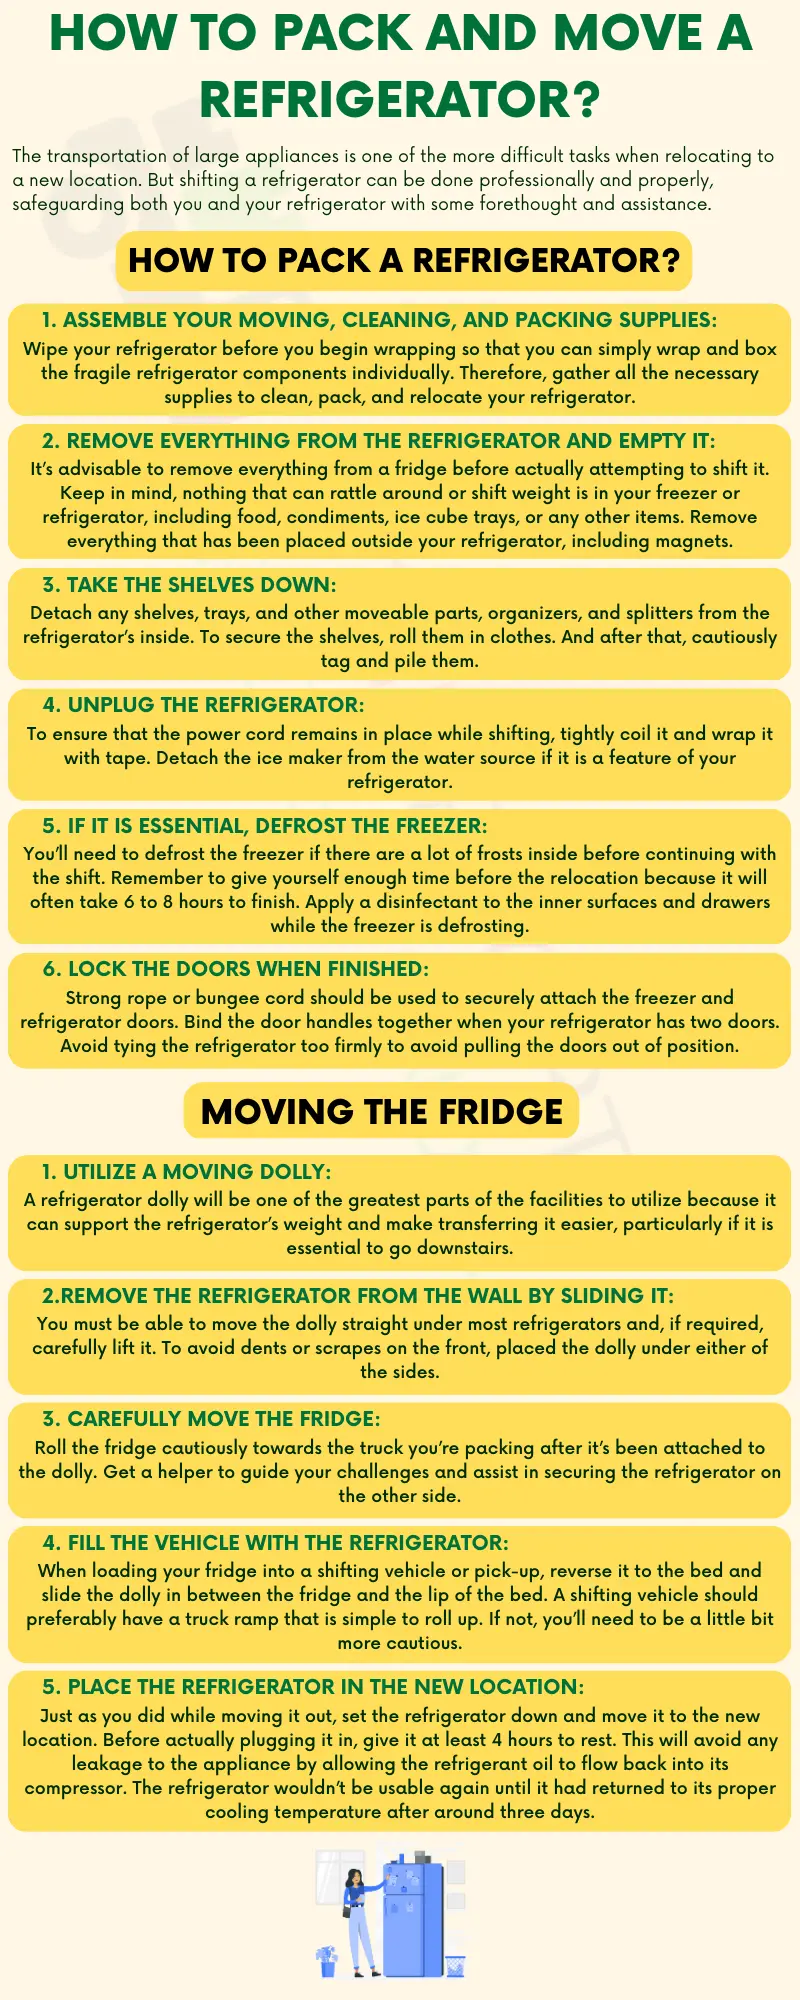 How To Pack And Move A Refrigerator Informational Infographic